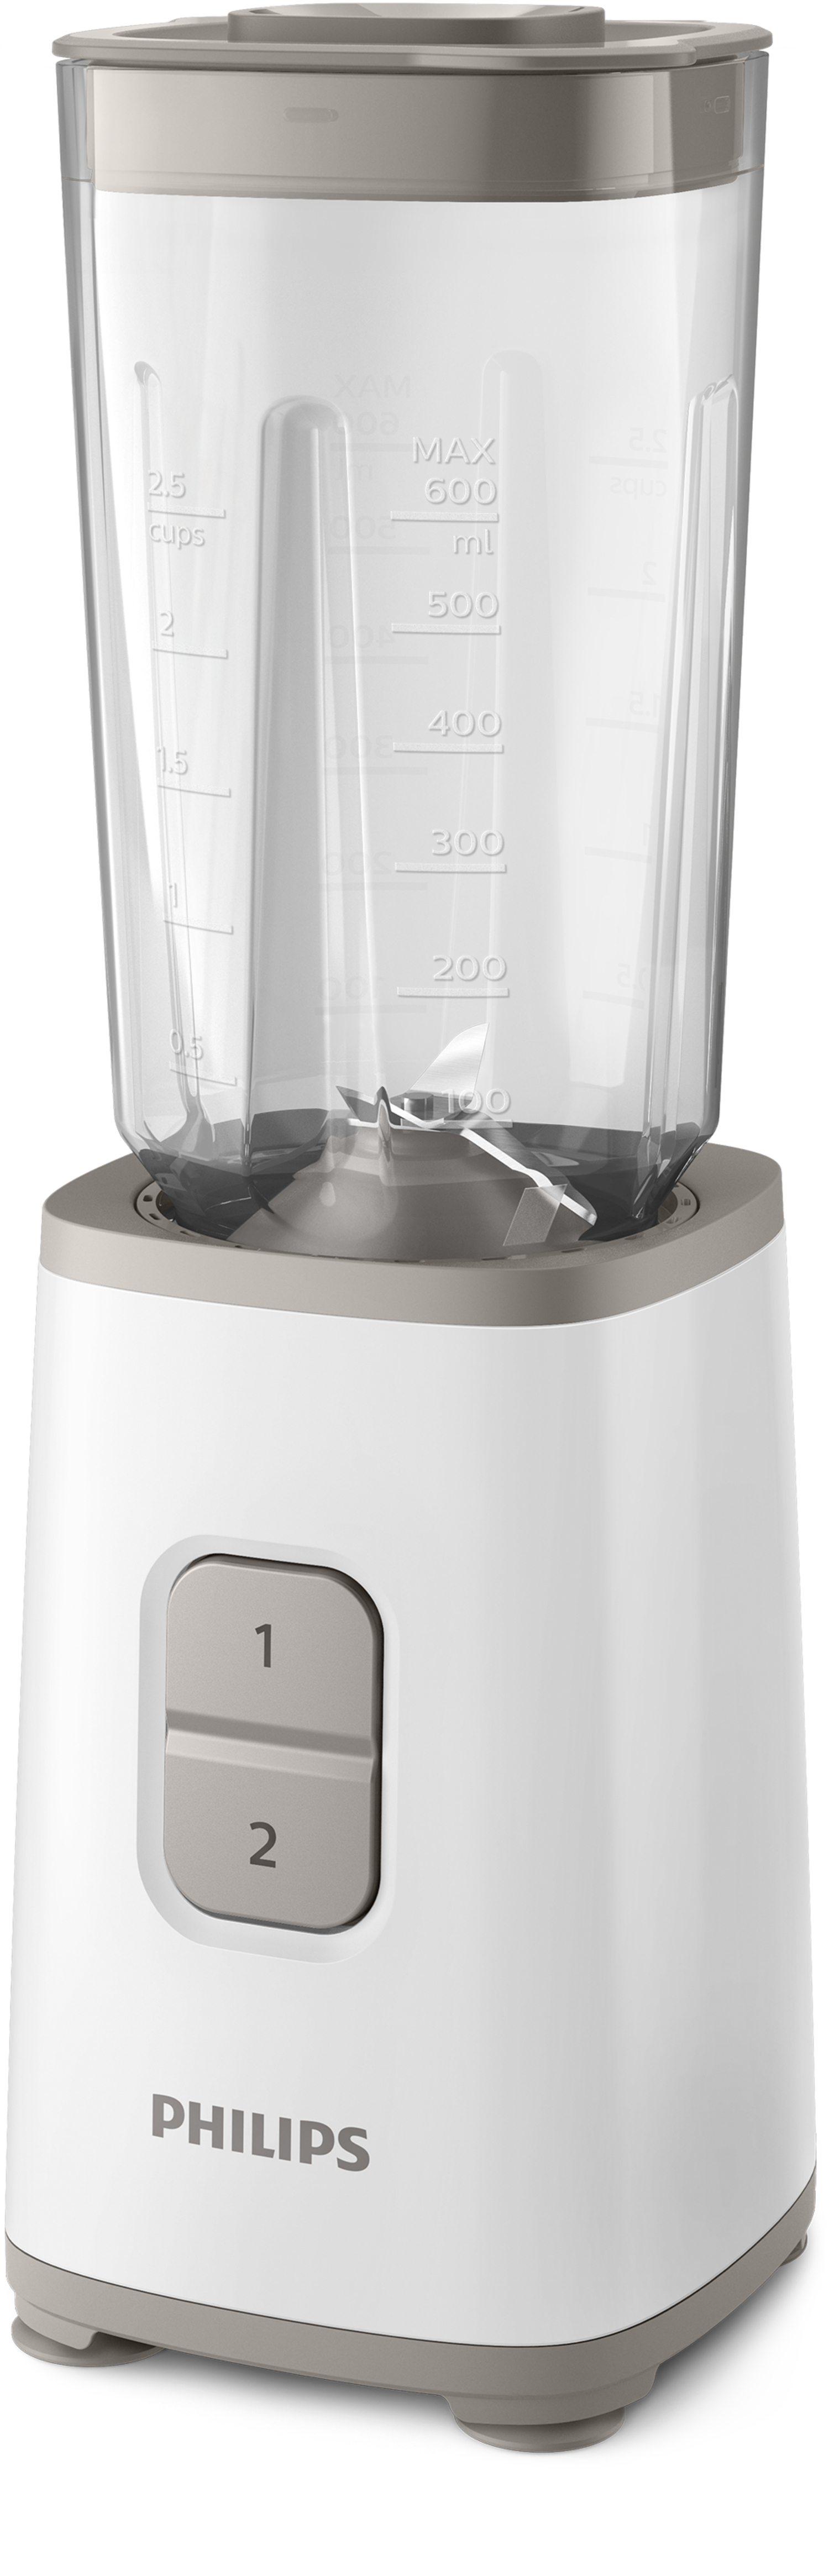 Philips Daily Collection HR2602/00 Miniblender